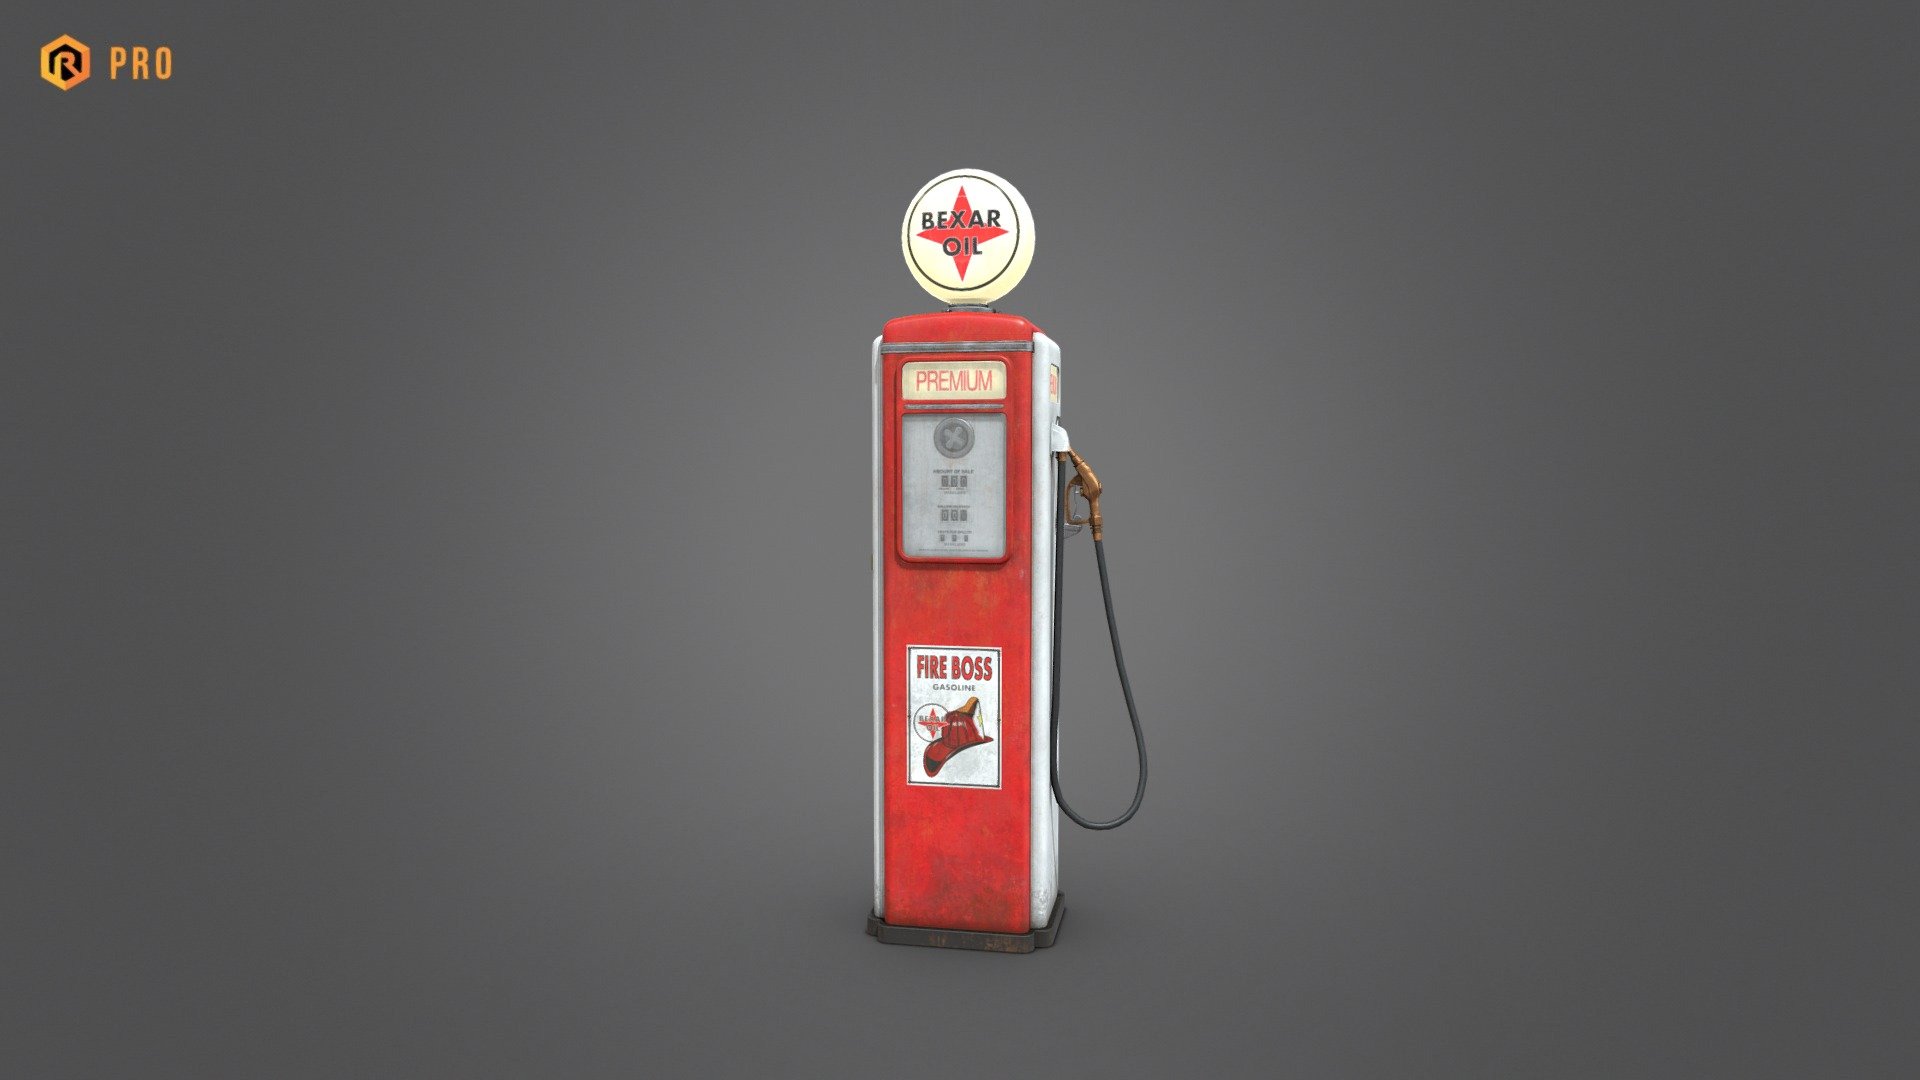 Low-poly PBR 3D model of Old Style Gas Pump (PRO Version).
This asset is best for use in games and other VR/AR, real-time applications such as Unity or Unreal Engine.
It can also be rendered in Blender (ex Cycles) or Vray as the model is equipped with all required PBR textures.

This PRO version includes additional bonus assets like Substance Painer source, hi-res bake mesh, Blender Cycles/Eevee sample scenes and more!

You can download regular, FREE version for free here: https://skfb.ly/oFEZH

Technical details:




3 PBR textures sets. (Main body, emission, alpha) 

7613 Triangles.

6691  Vertices.

Model is one mesh.

Lot of additional file formats included (Blender, Unity, Maya etc.)  

More file formats are available in additional zip file on product page (See all files)

Please feel free to contact me if you have any questions or need any support for this asset.

Support e-mail: support@rescue3d.com - Vintage Gas Pump - PRO Version - Buy Royalty Free 3D model by Rescue3D Assets (@rescue3d) 3d model